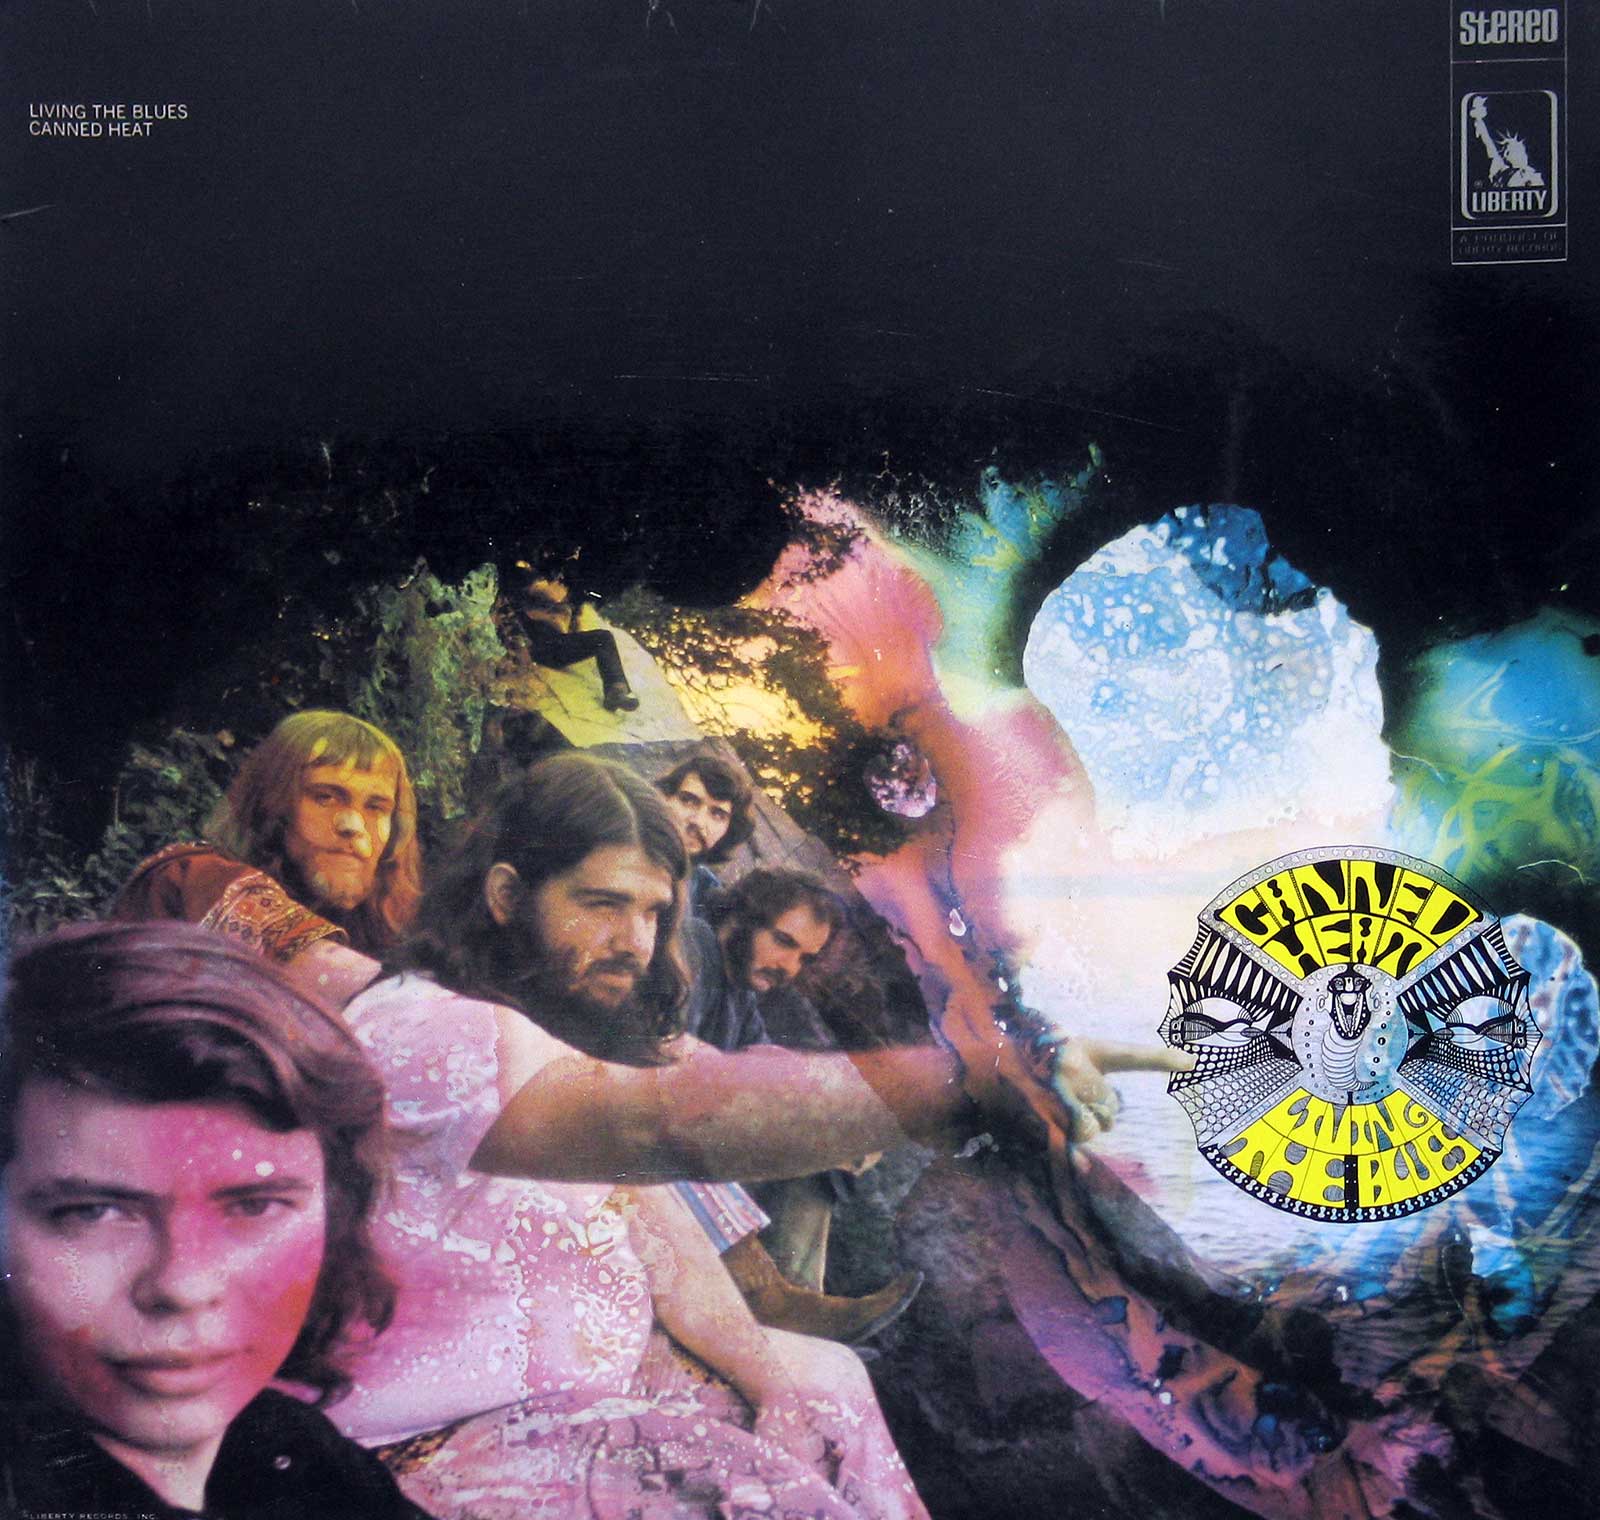 large album front cover photo of: Canned Heat Living Blues 